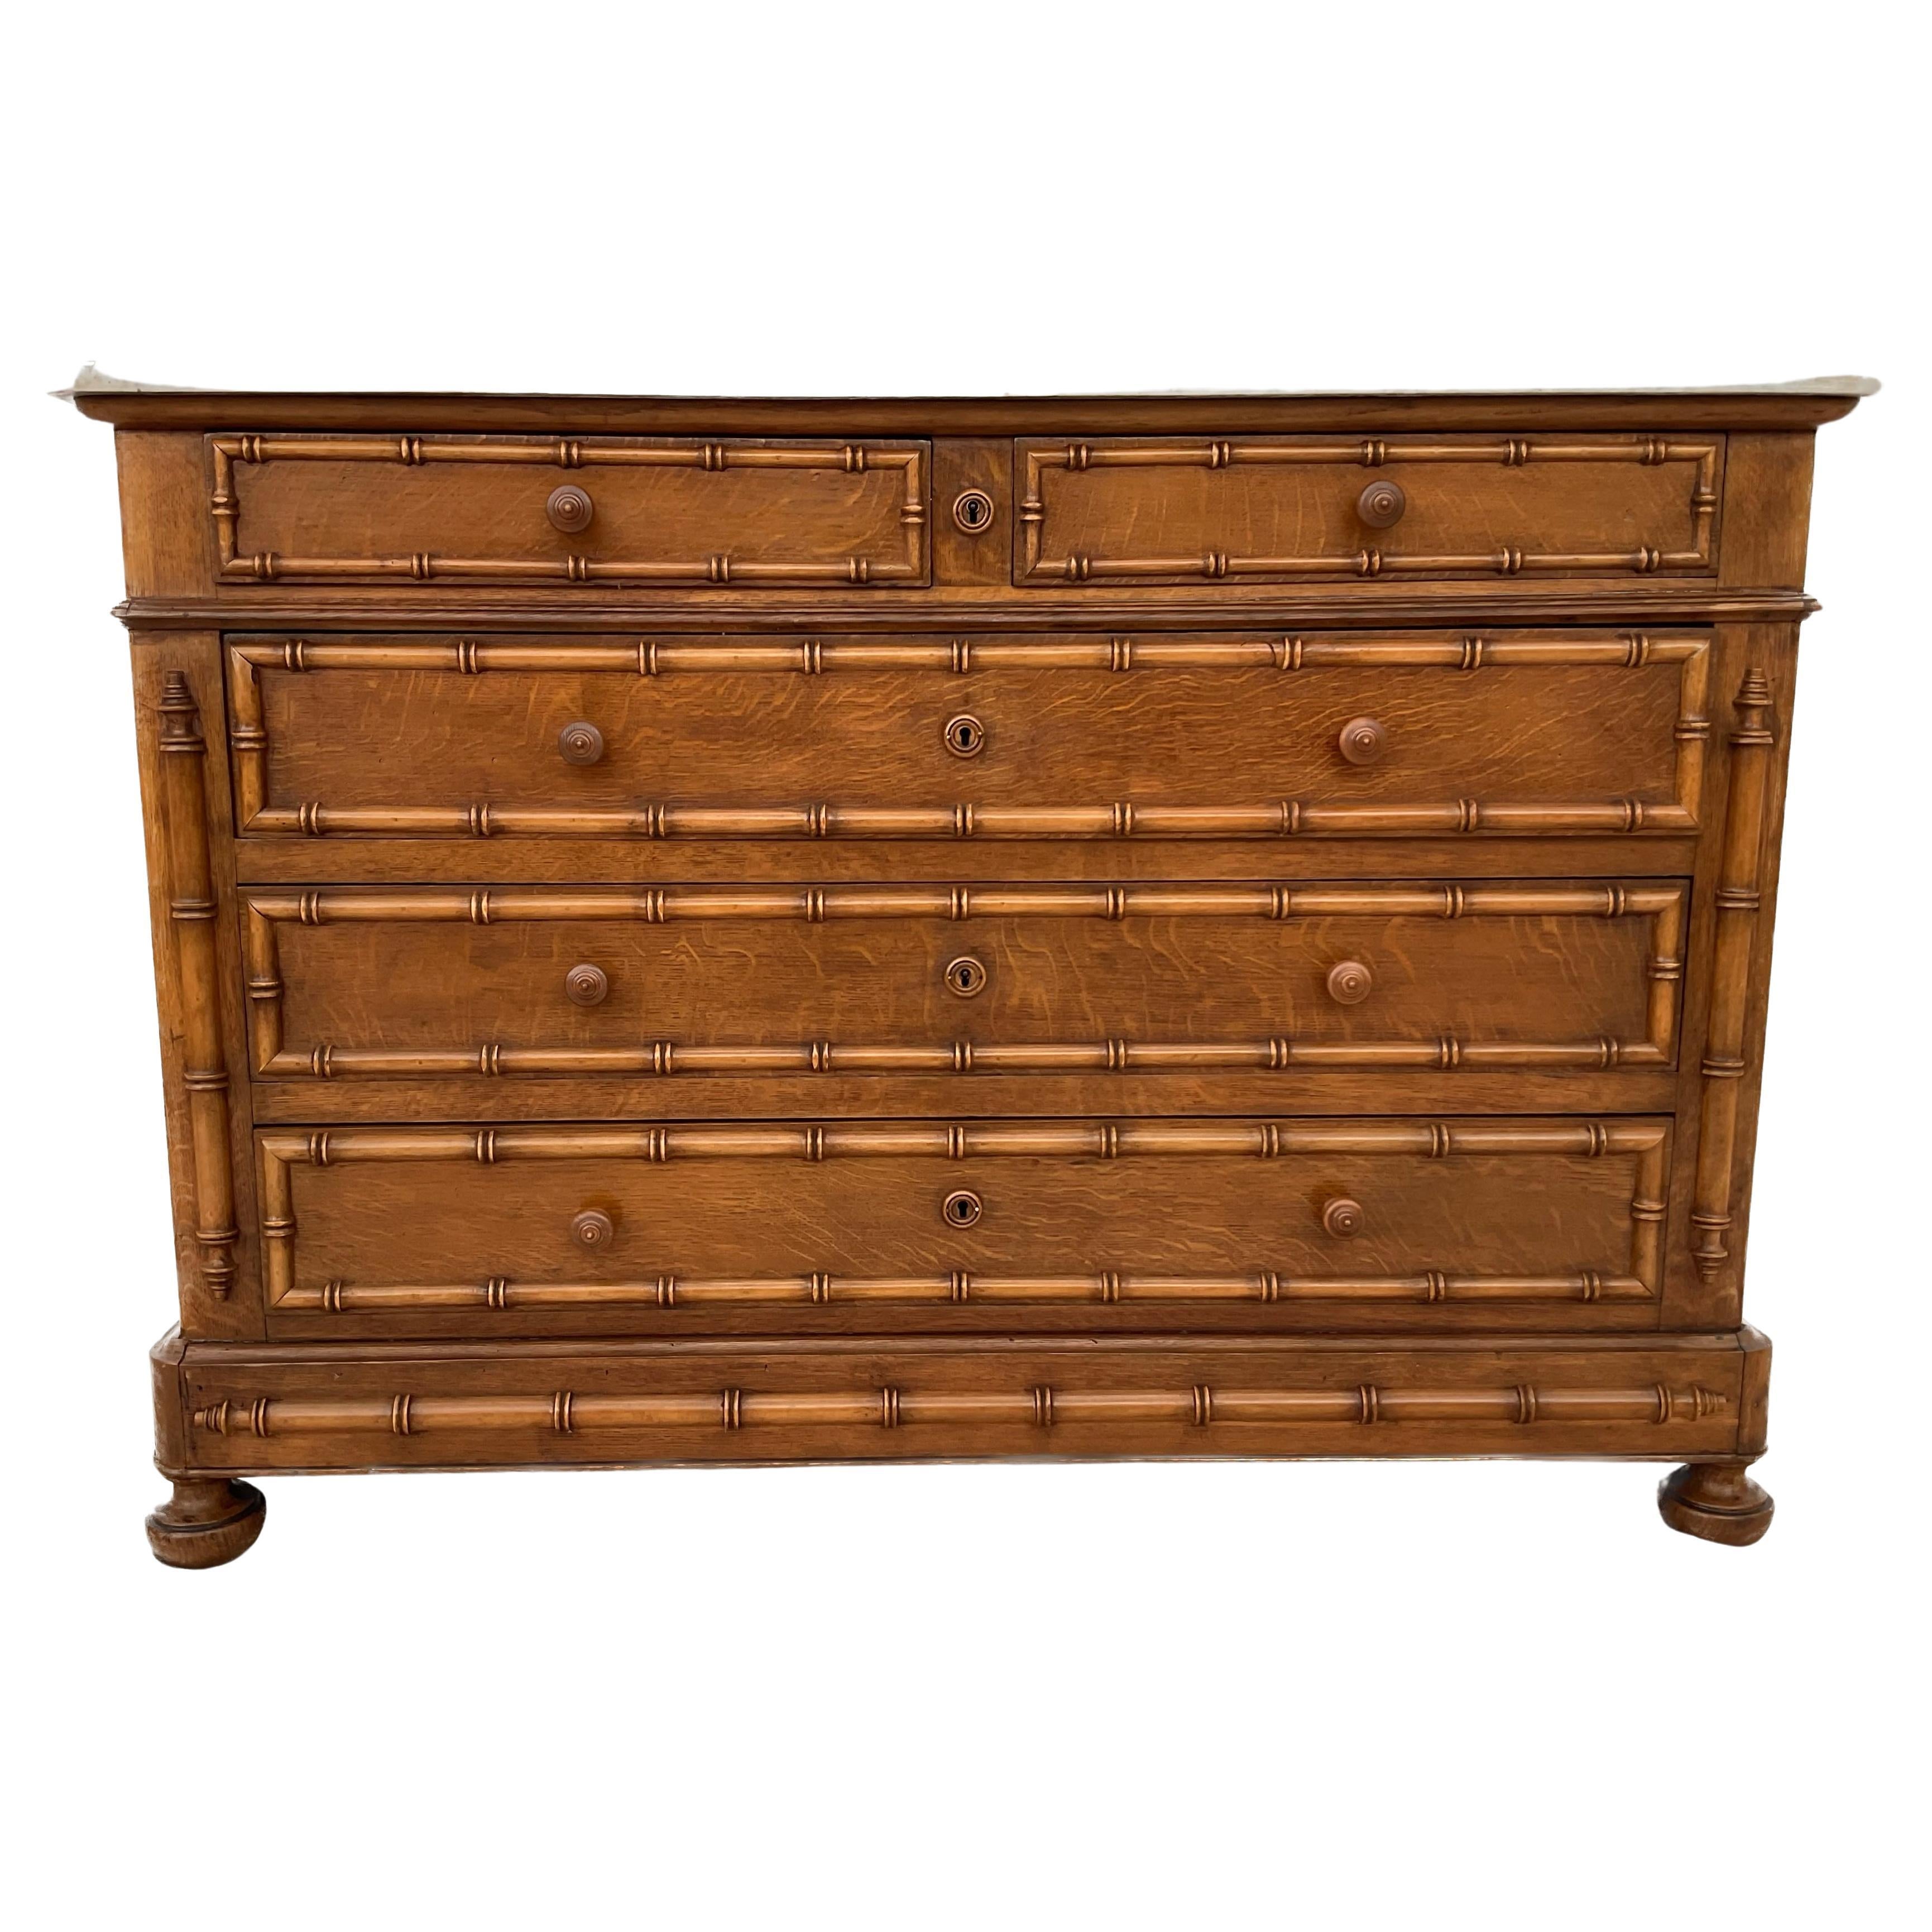 19th Century French Faux Bamboo Commode With Marble Top